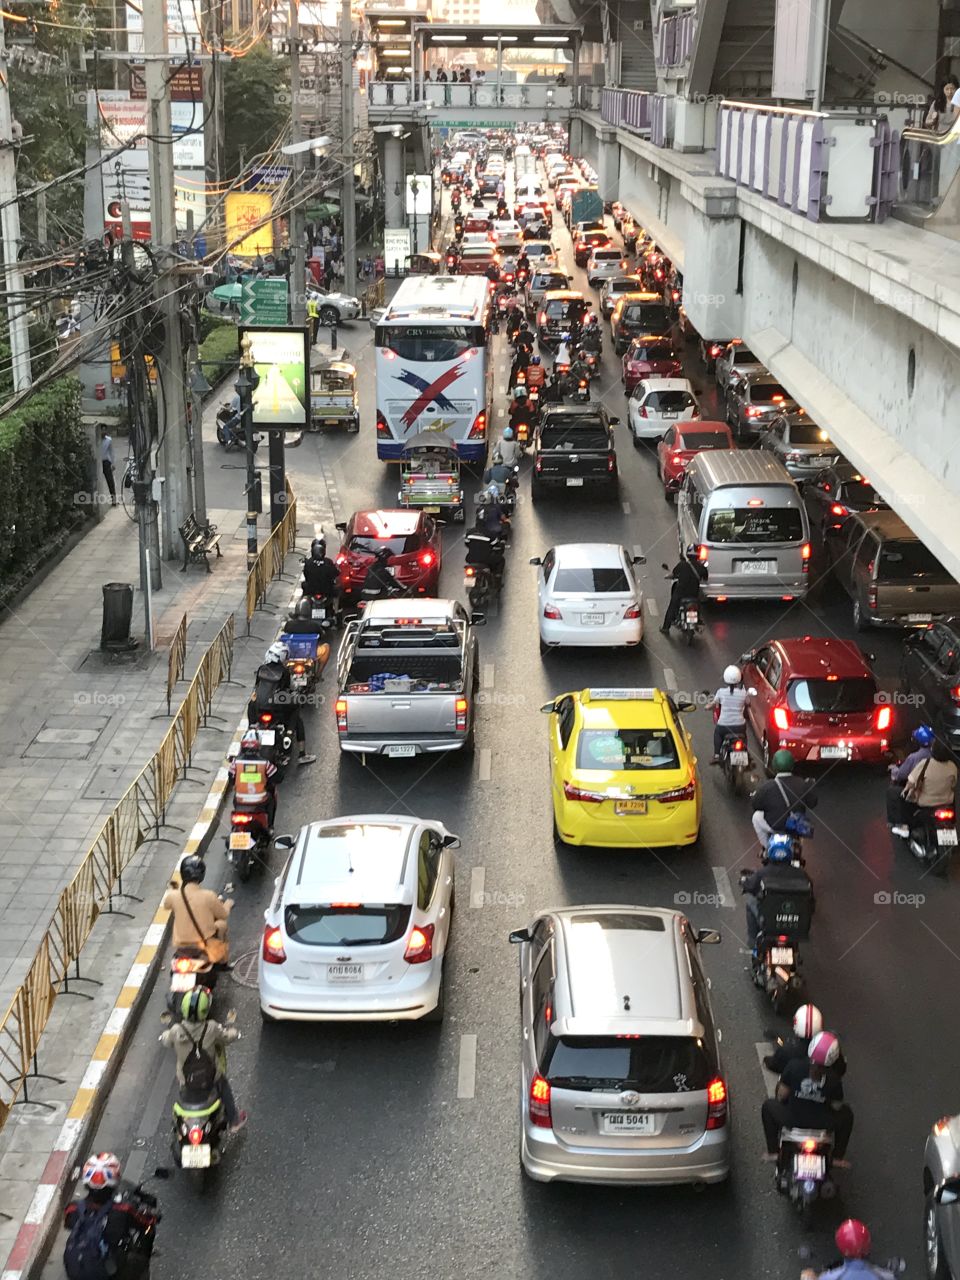 Bumper to bumper rush hour on busy city street